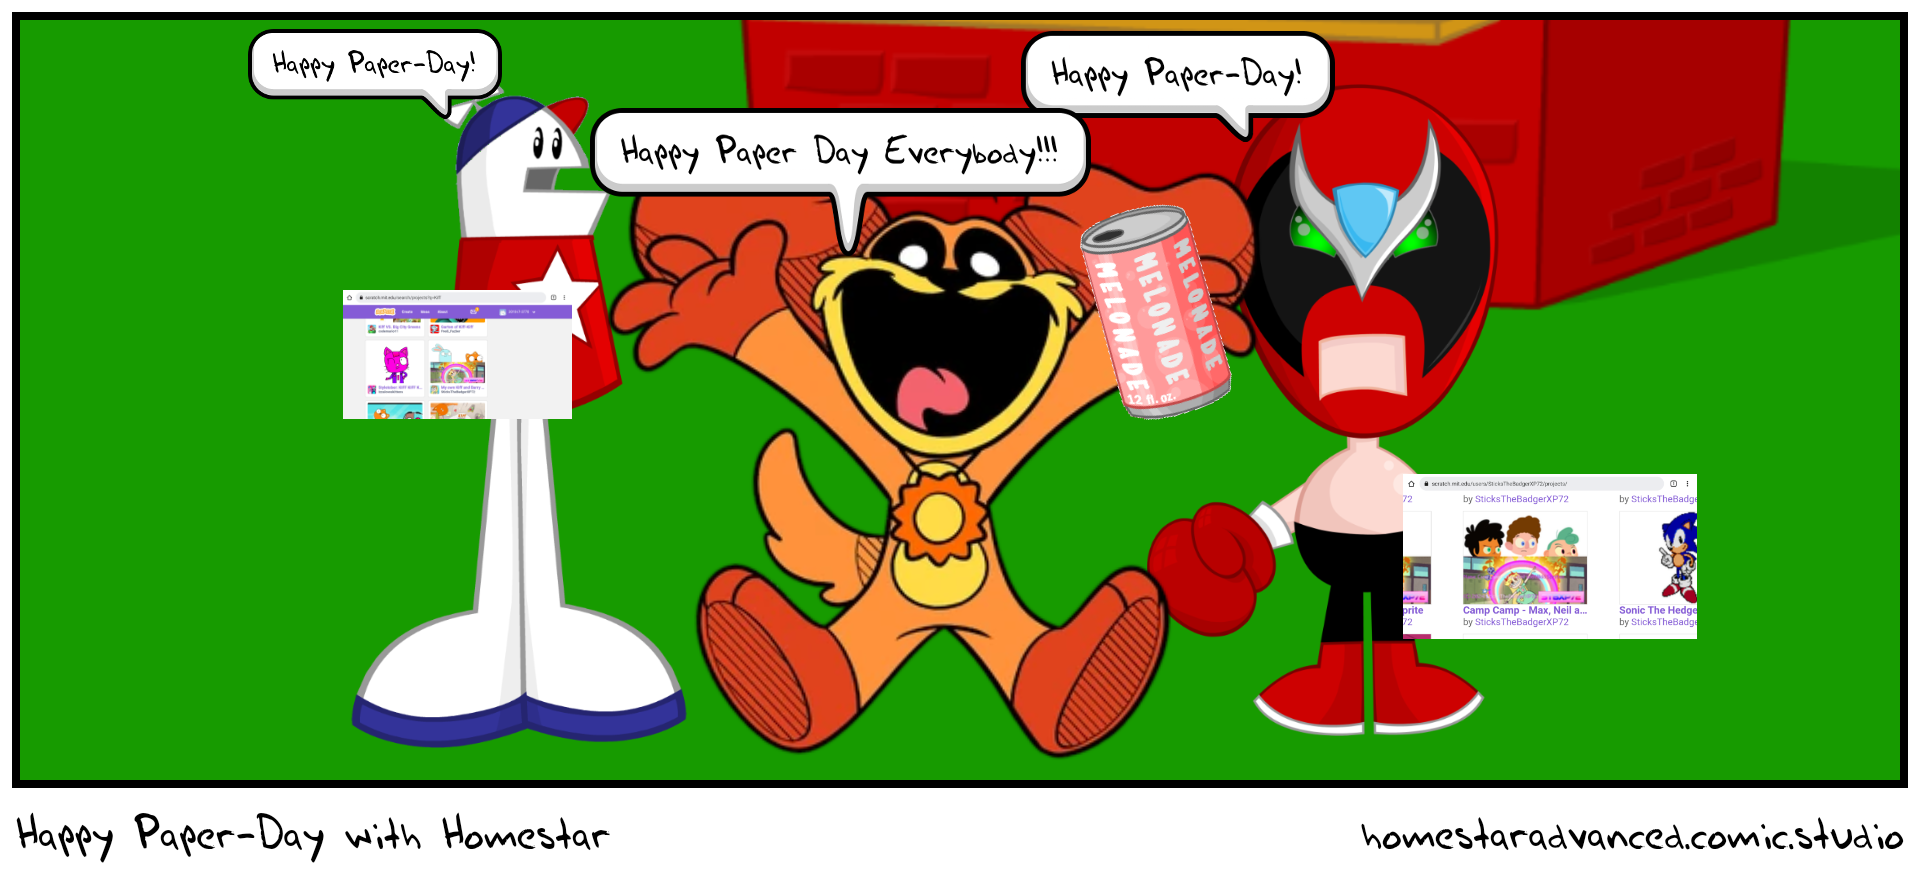 Happy Paper-Day with Homestar